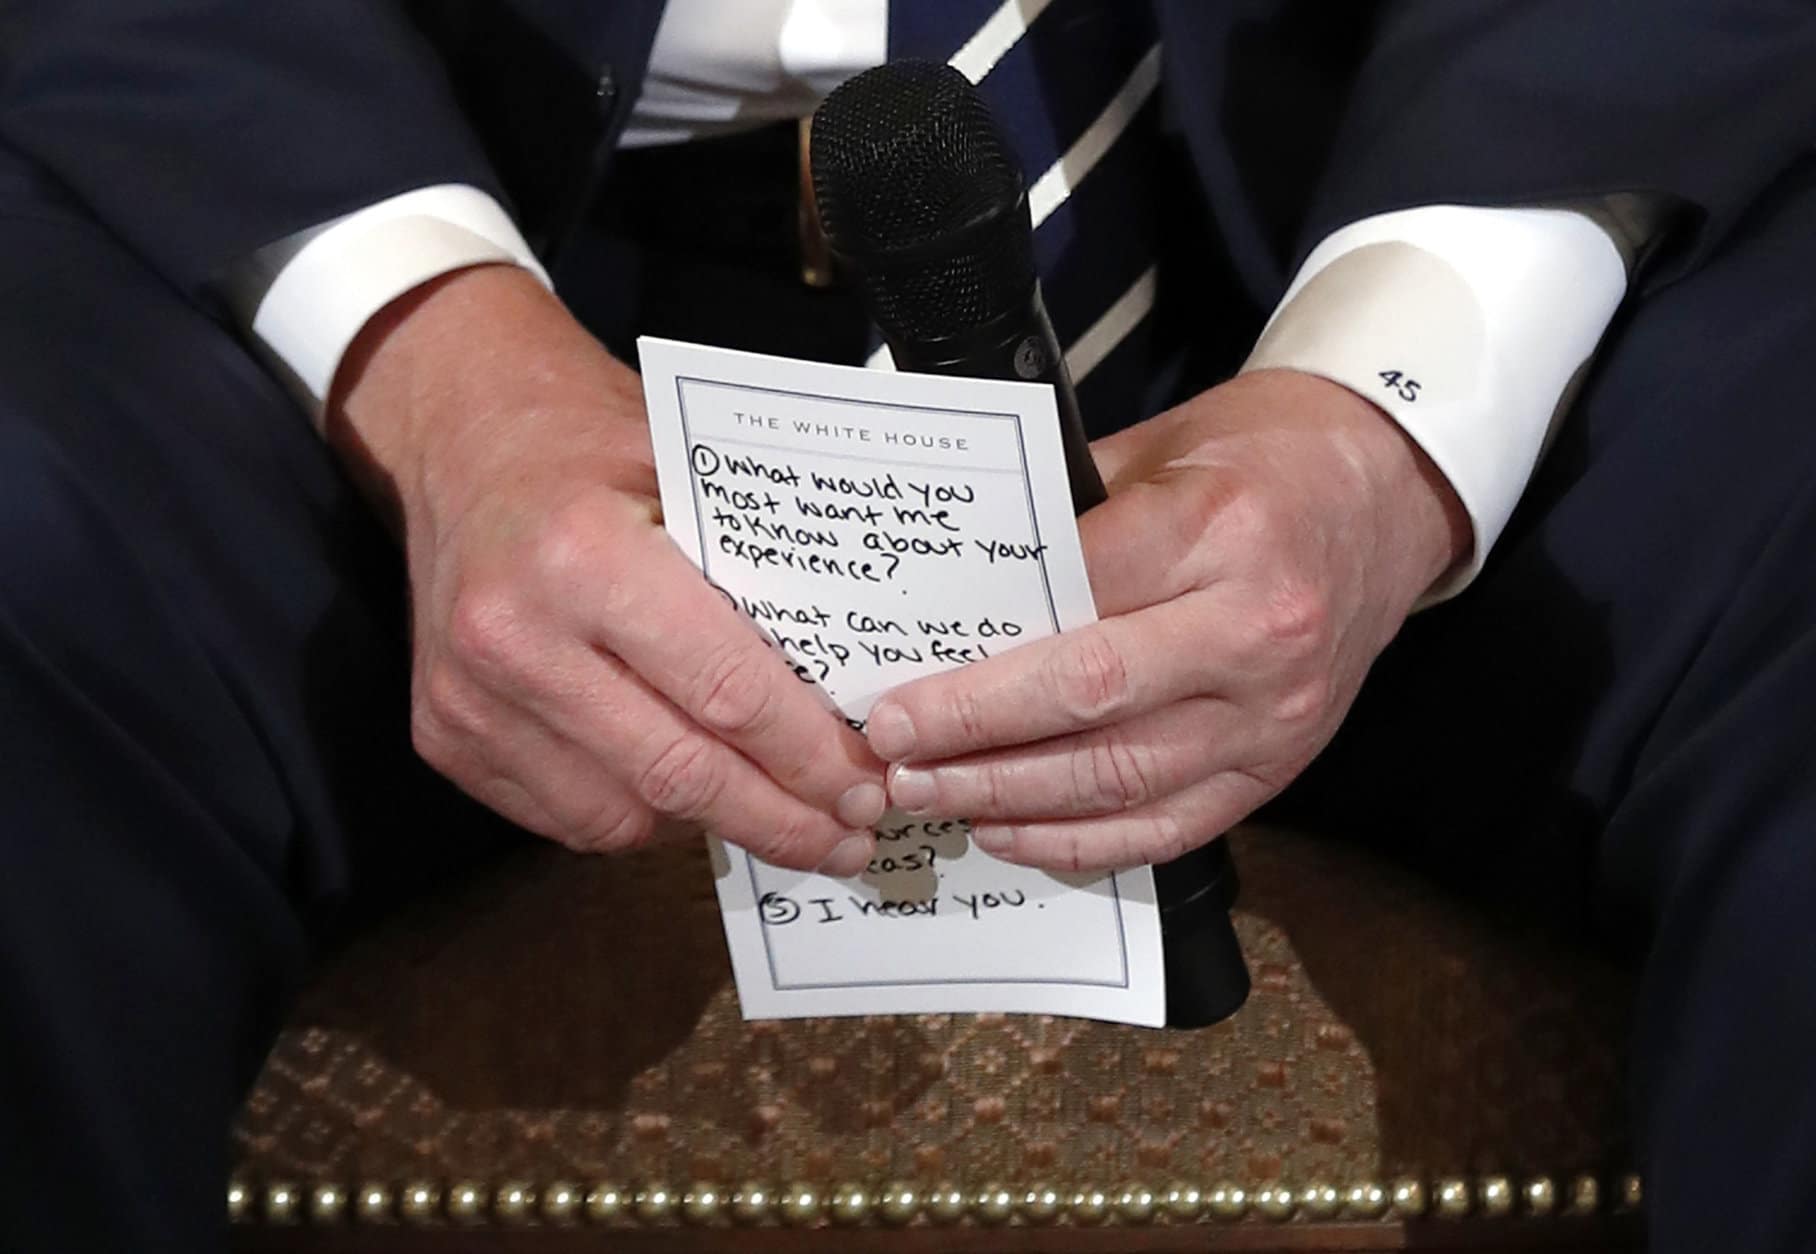 President Donald Trump holds notes during a listening session with high school students and teachers at the White House in Washington on Feb. 21, 2018. Trump heard the stories of students and parents affected by school shootings, one week after the deadly mass shooting at Marjory Stoneman Douglas High School in Florida. (AP Photo/Carolyn Kaster)